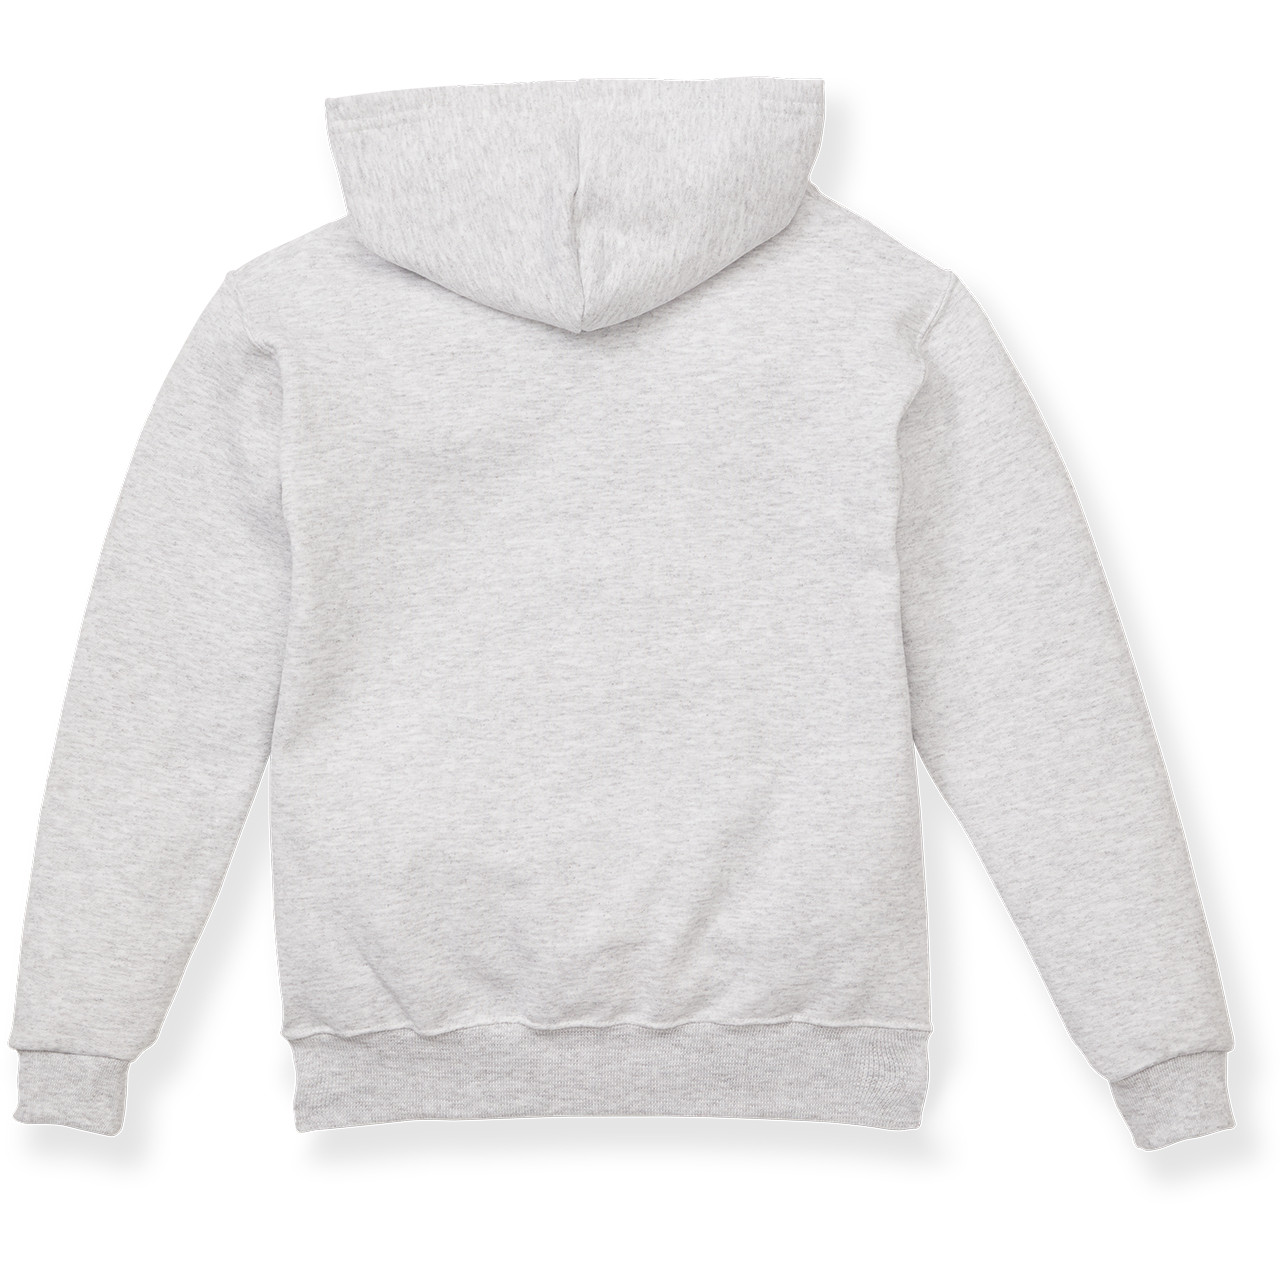 Full-Zip Hooded Sweatshirt with embroidered logo [NJ031-993/PAY-OXFORD] -  FlynnO'Hara Uniforms